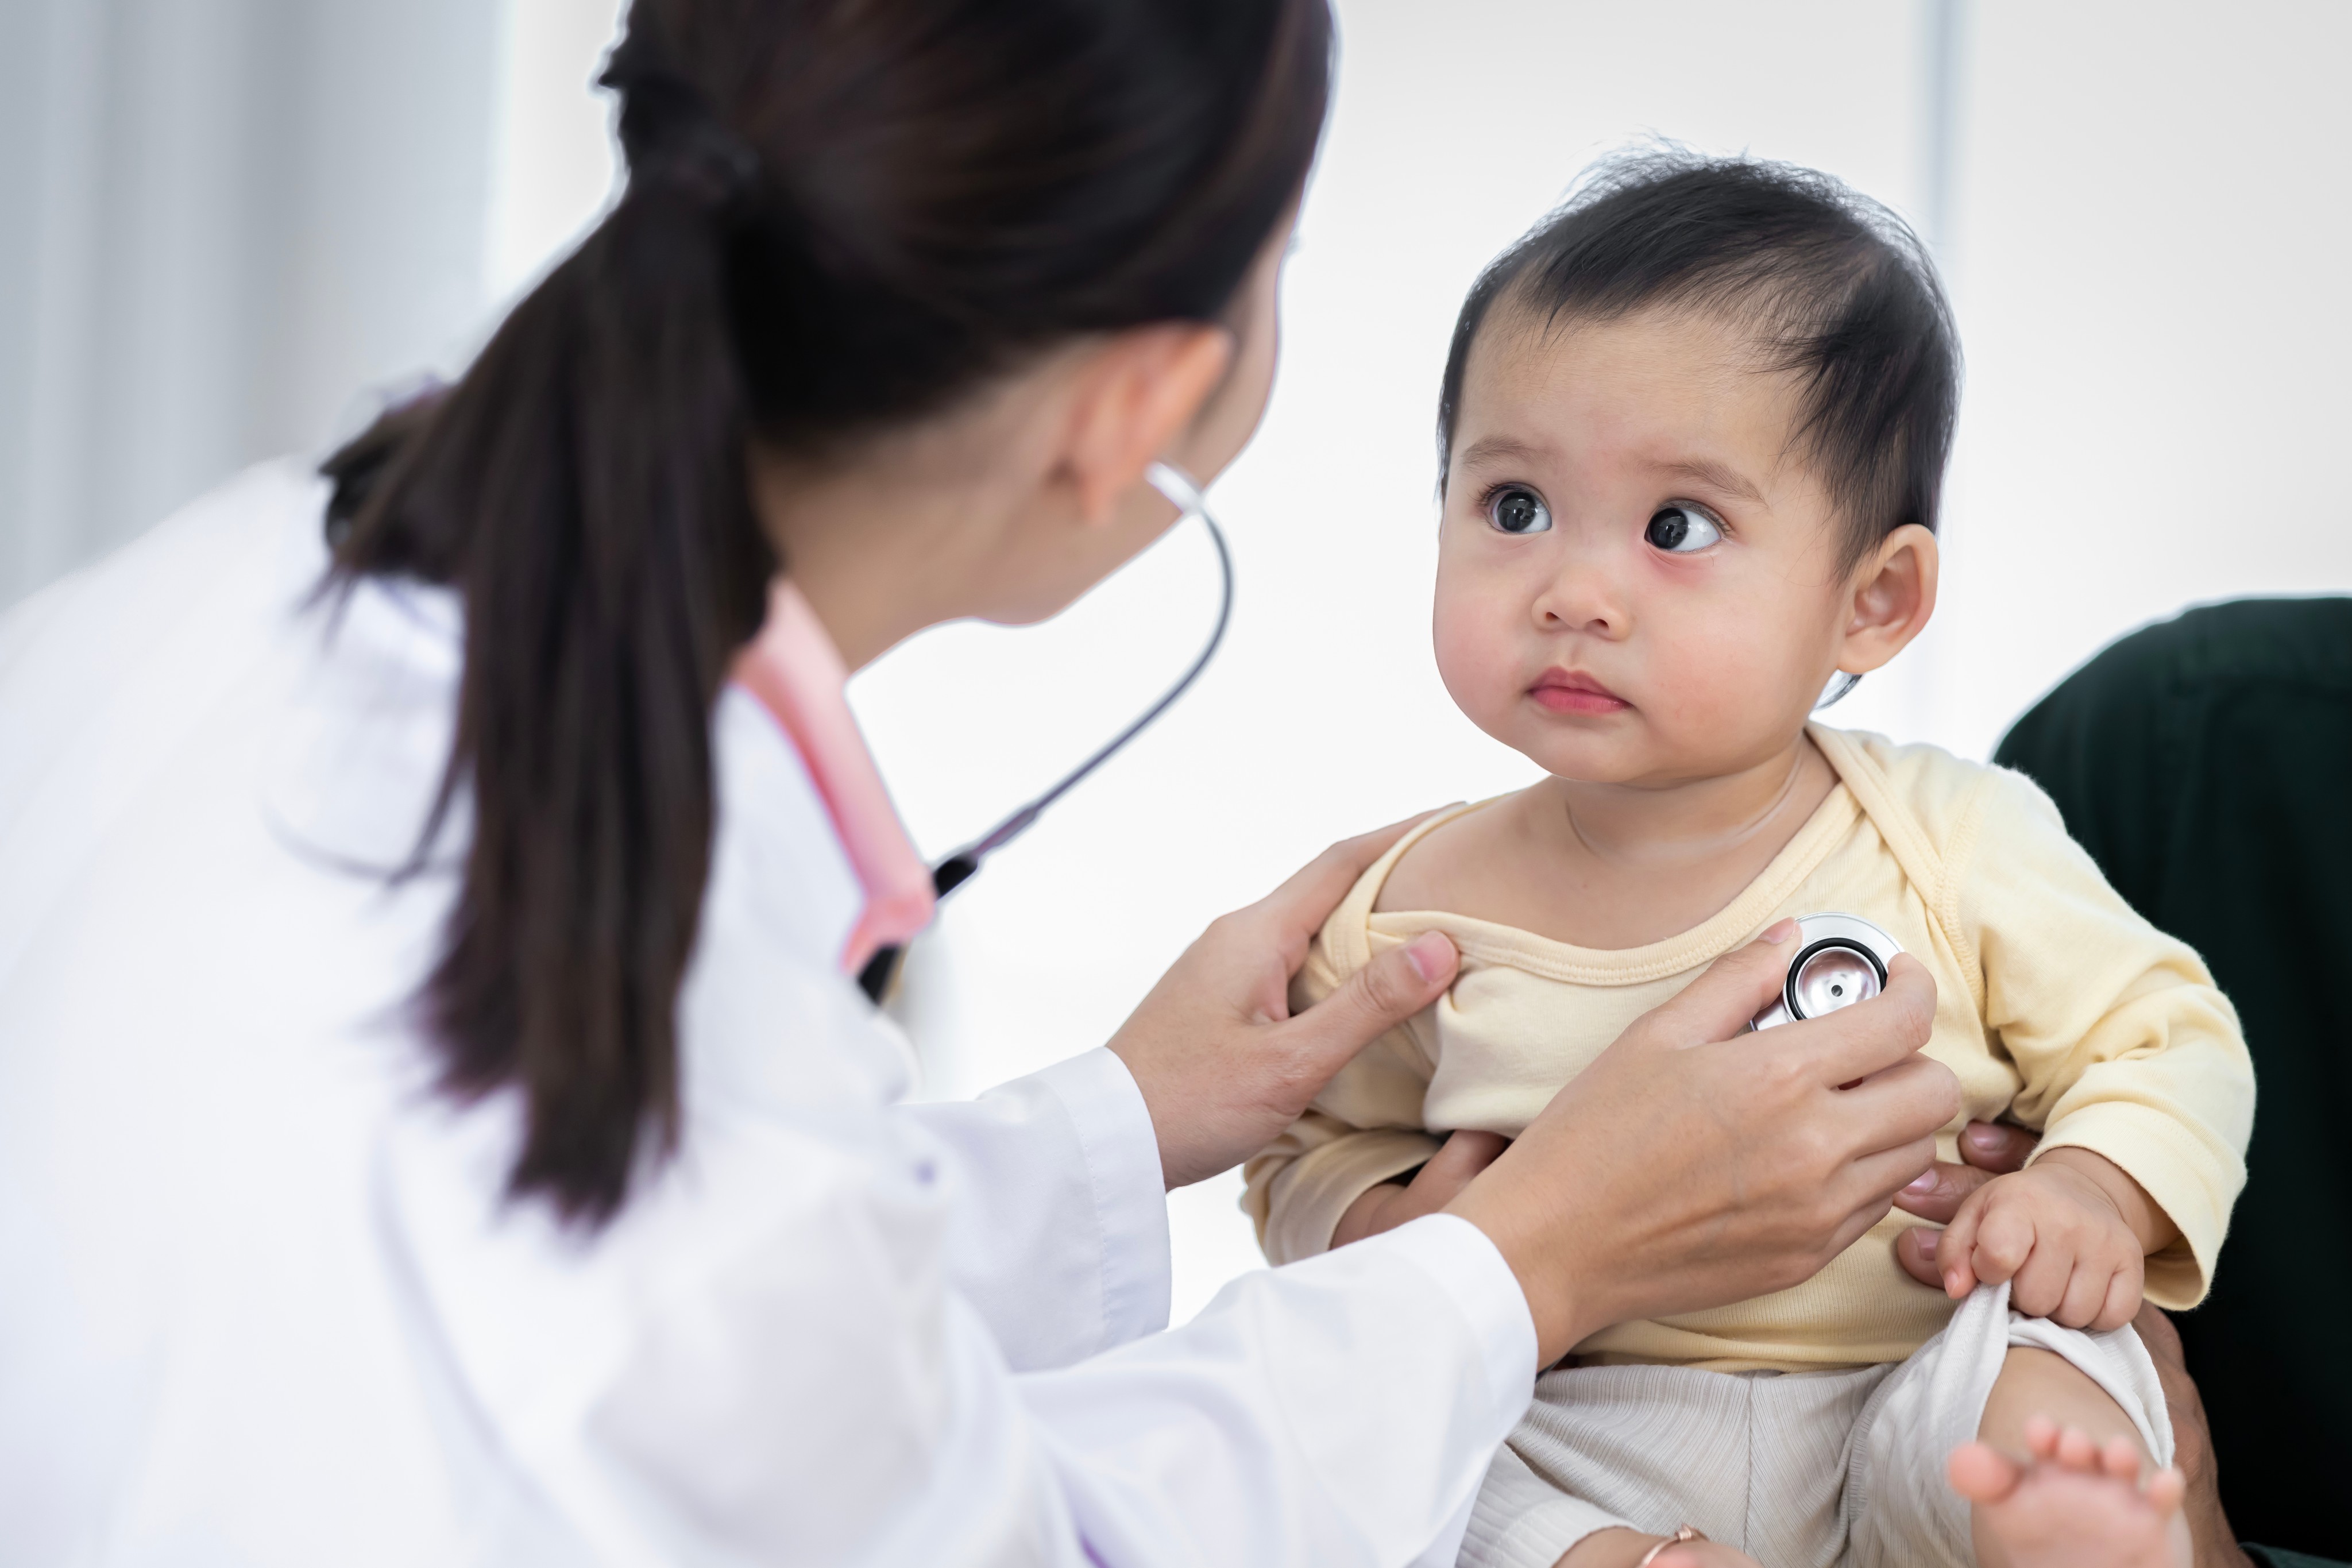 A new algorithm could pick up signs of autism as early as the first month of life, putting pediatricians and parents on alert and therapies quickly started, a US study finds. Photo: Shutterstock